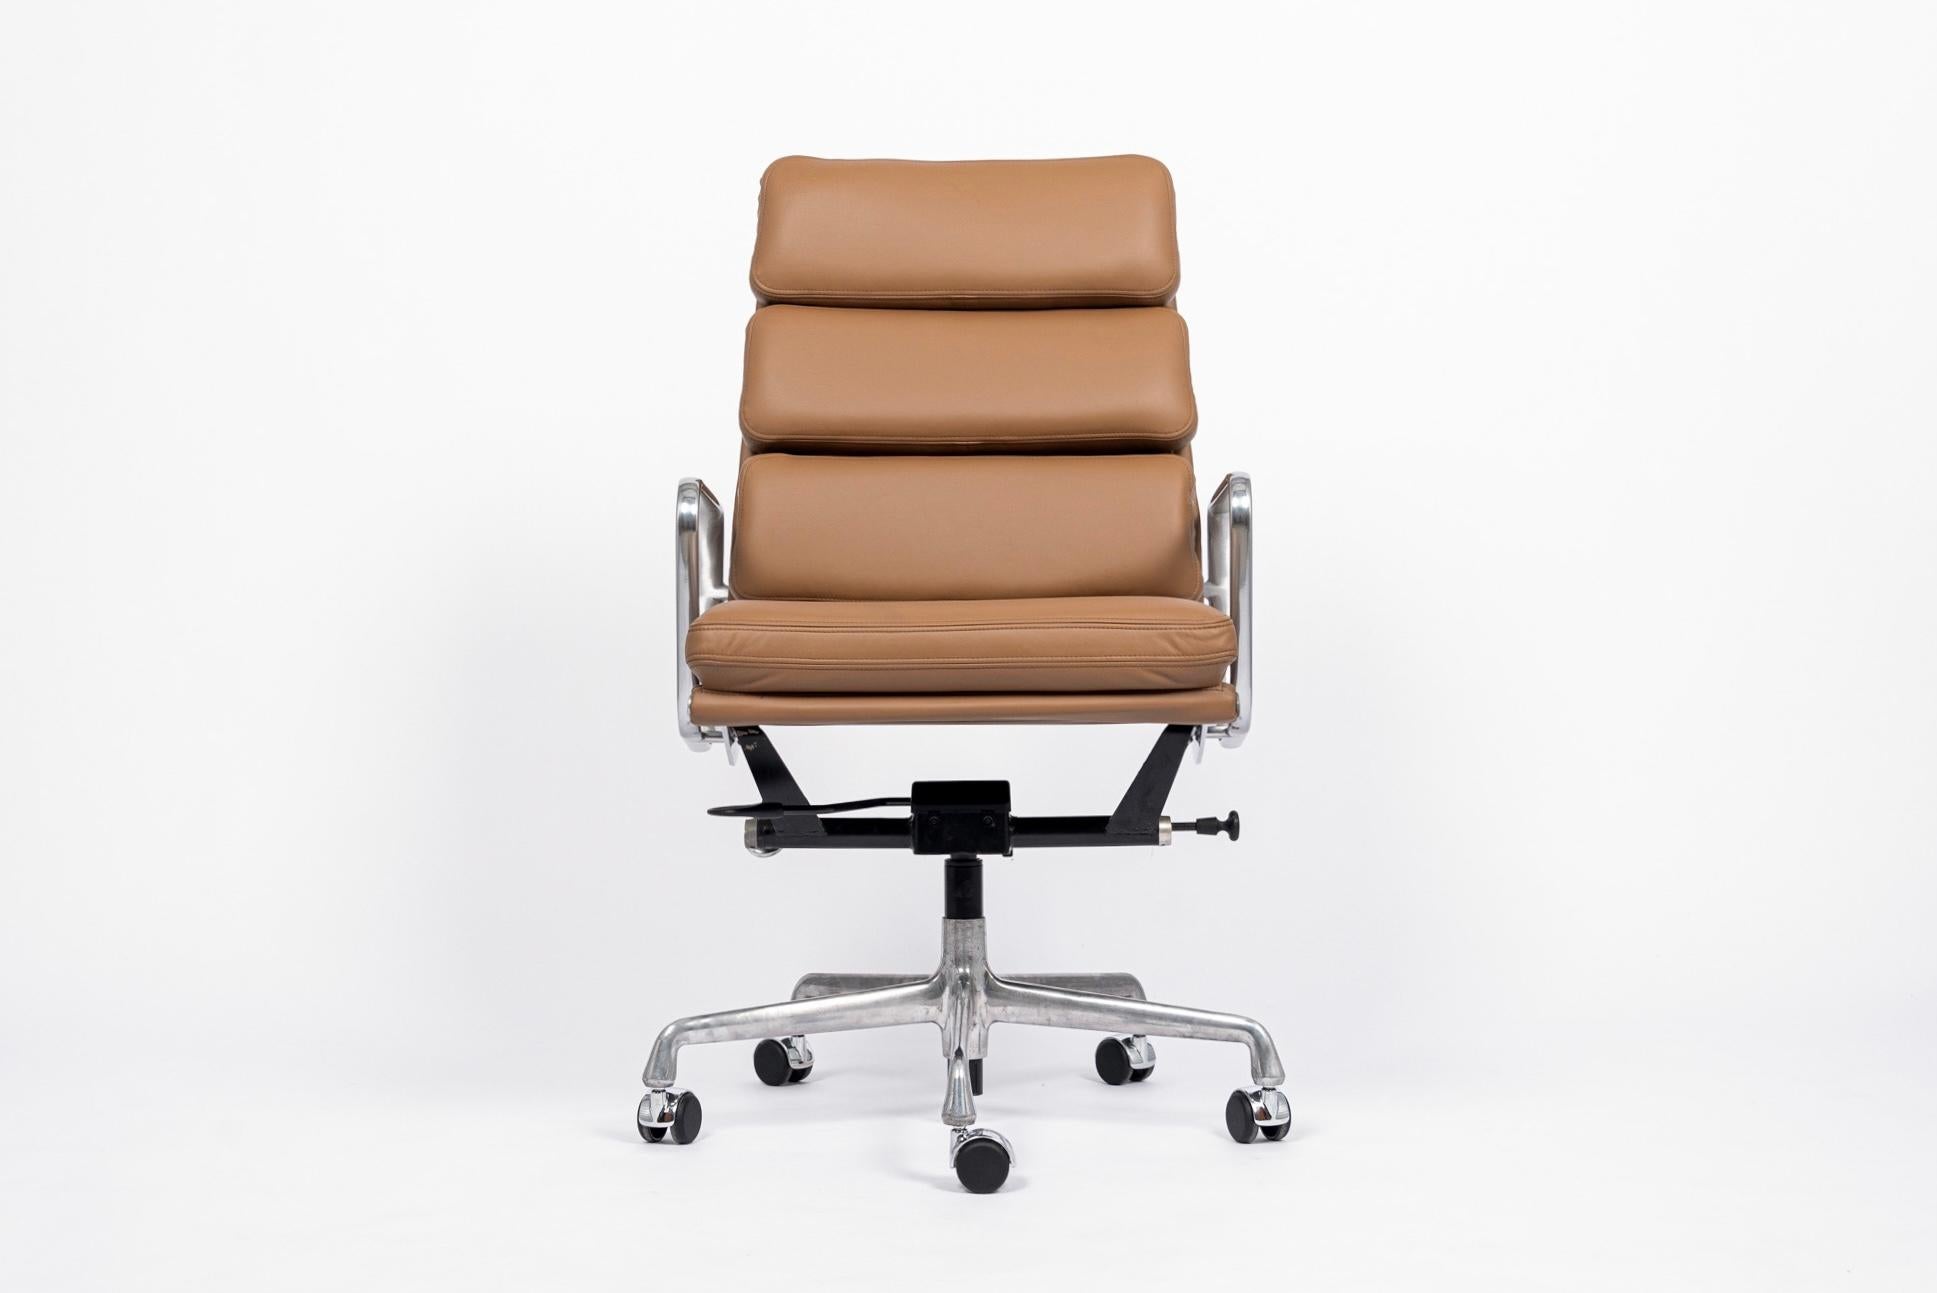 This authentic Eames for Herman Miller Soft Pad Executive Height office chair from the Aluminum Group Collection was manufactured in the 2000s. This classic mid century modern office chair was first introduced in 1969 by Charles and Ray Eames as the